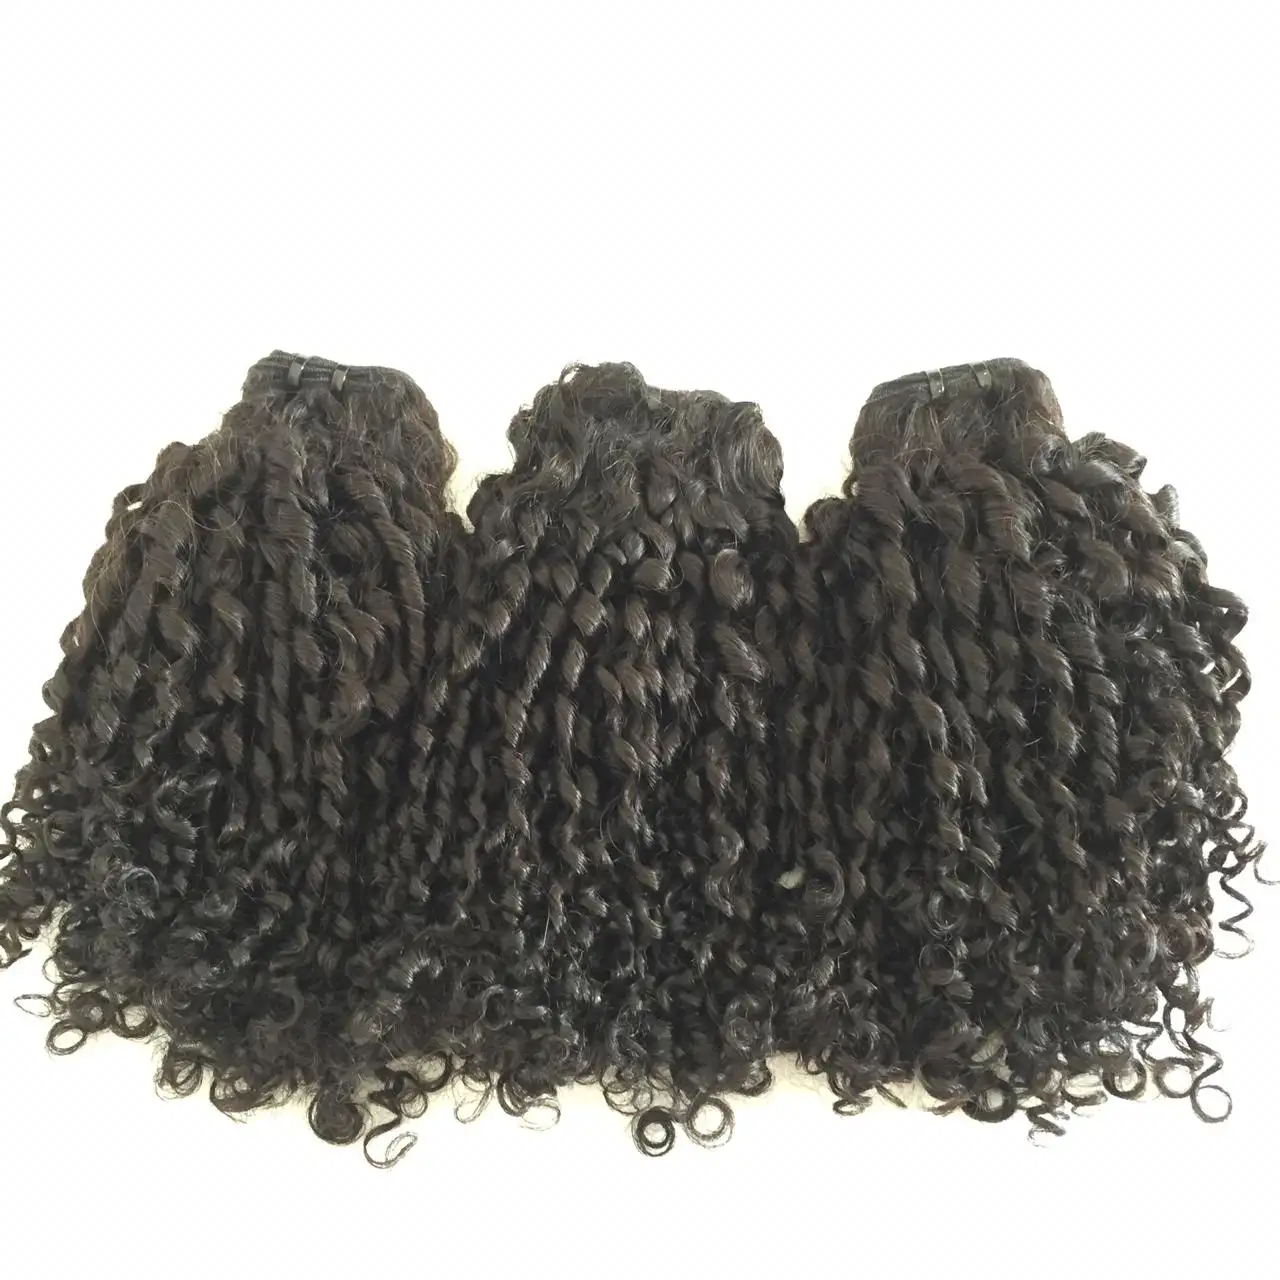 wholesale virgin closure 2x4 pixie curly,cuticle aligned extensions-wig, livihair fiber hair in hair styling products,Maintain s